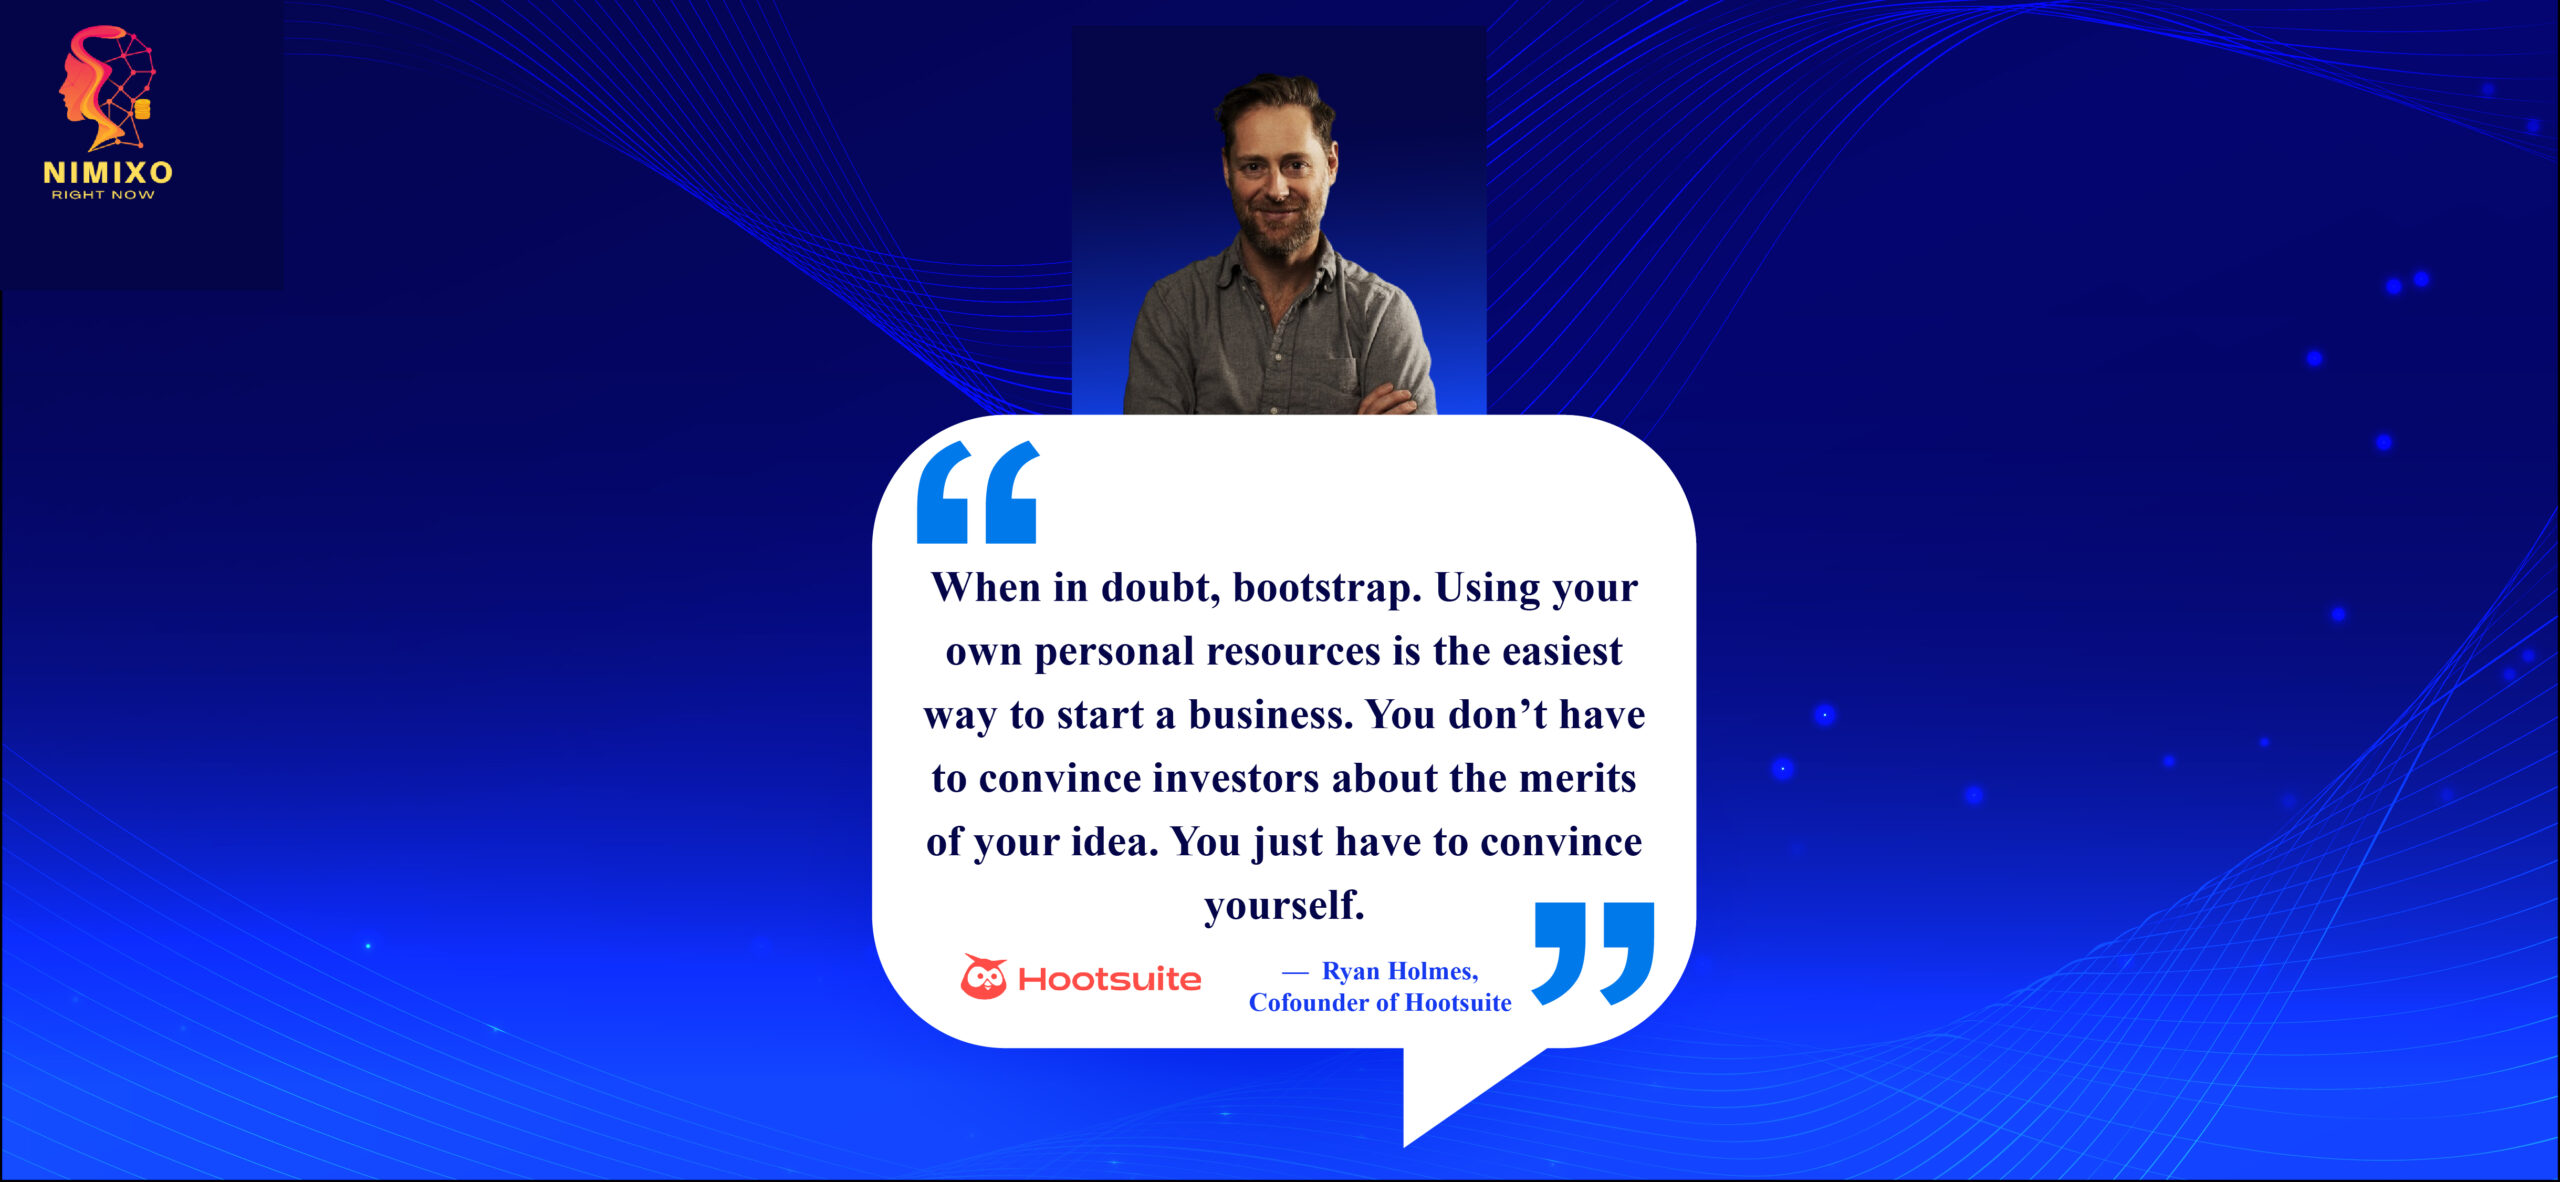 Skip the Pitch, Start Now: The Bootstrapper's Hustle Guide. When in doubt, bootstrap. Using your own personal resources is the easiest way to start a business. You don’t have to convince investors about the merits of your idea. You just have to convince yourself. -Ryan Holmes, Cofounder of Hootsuite